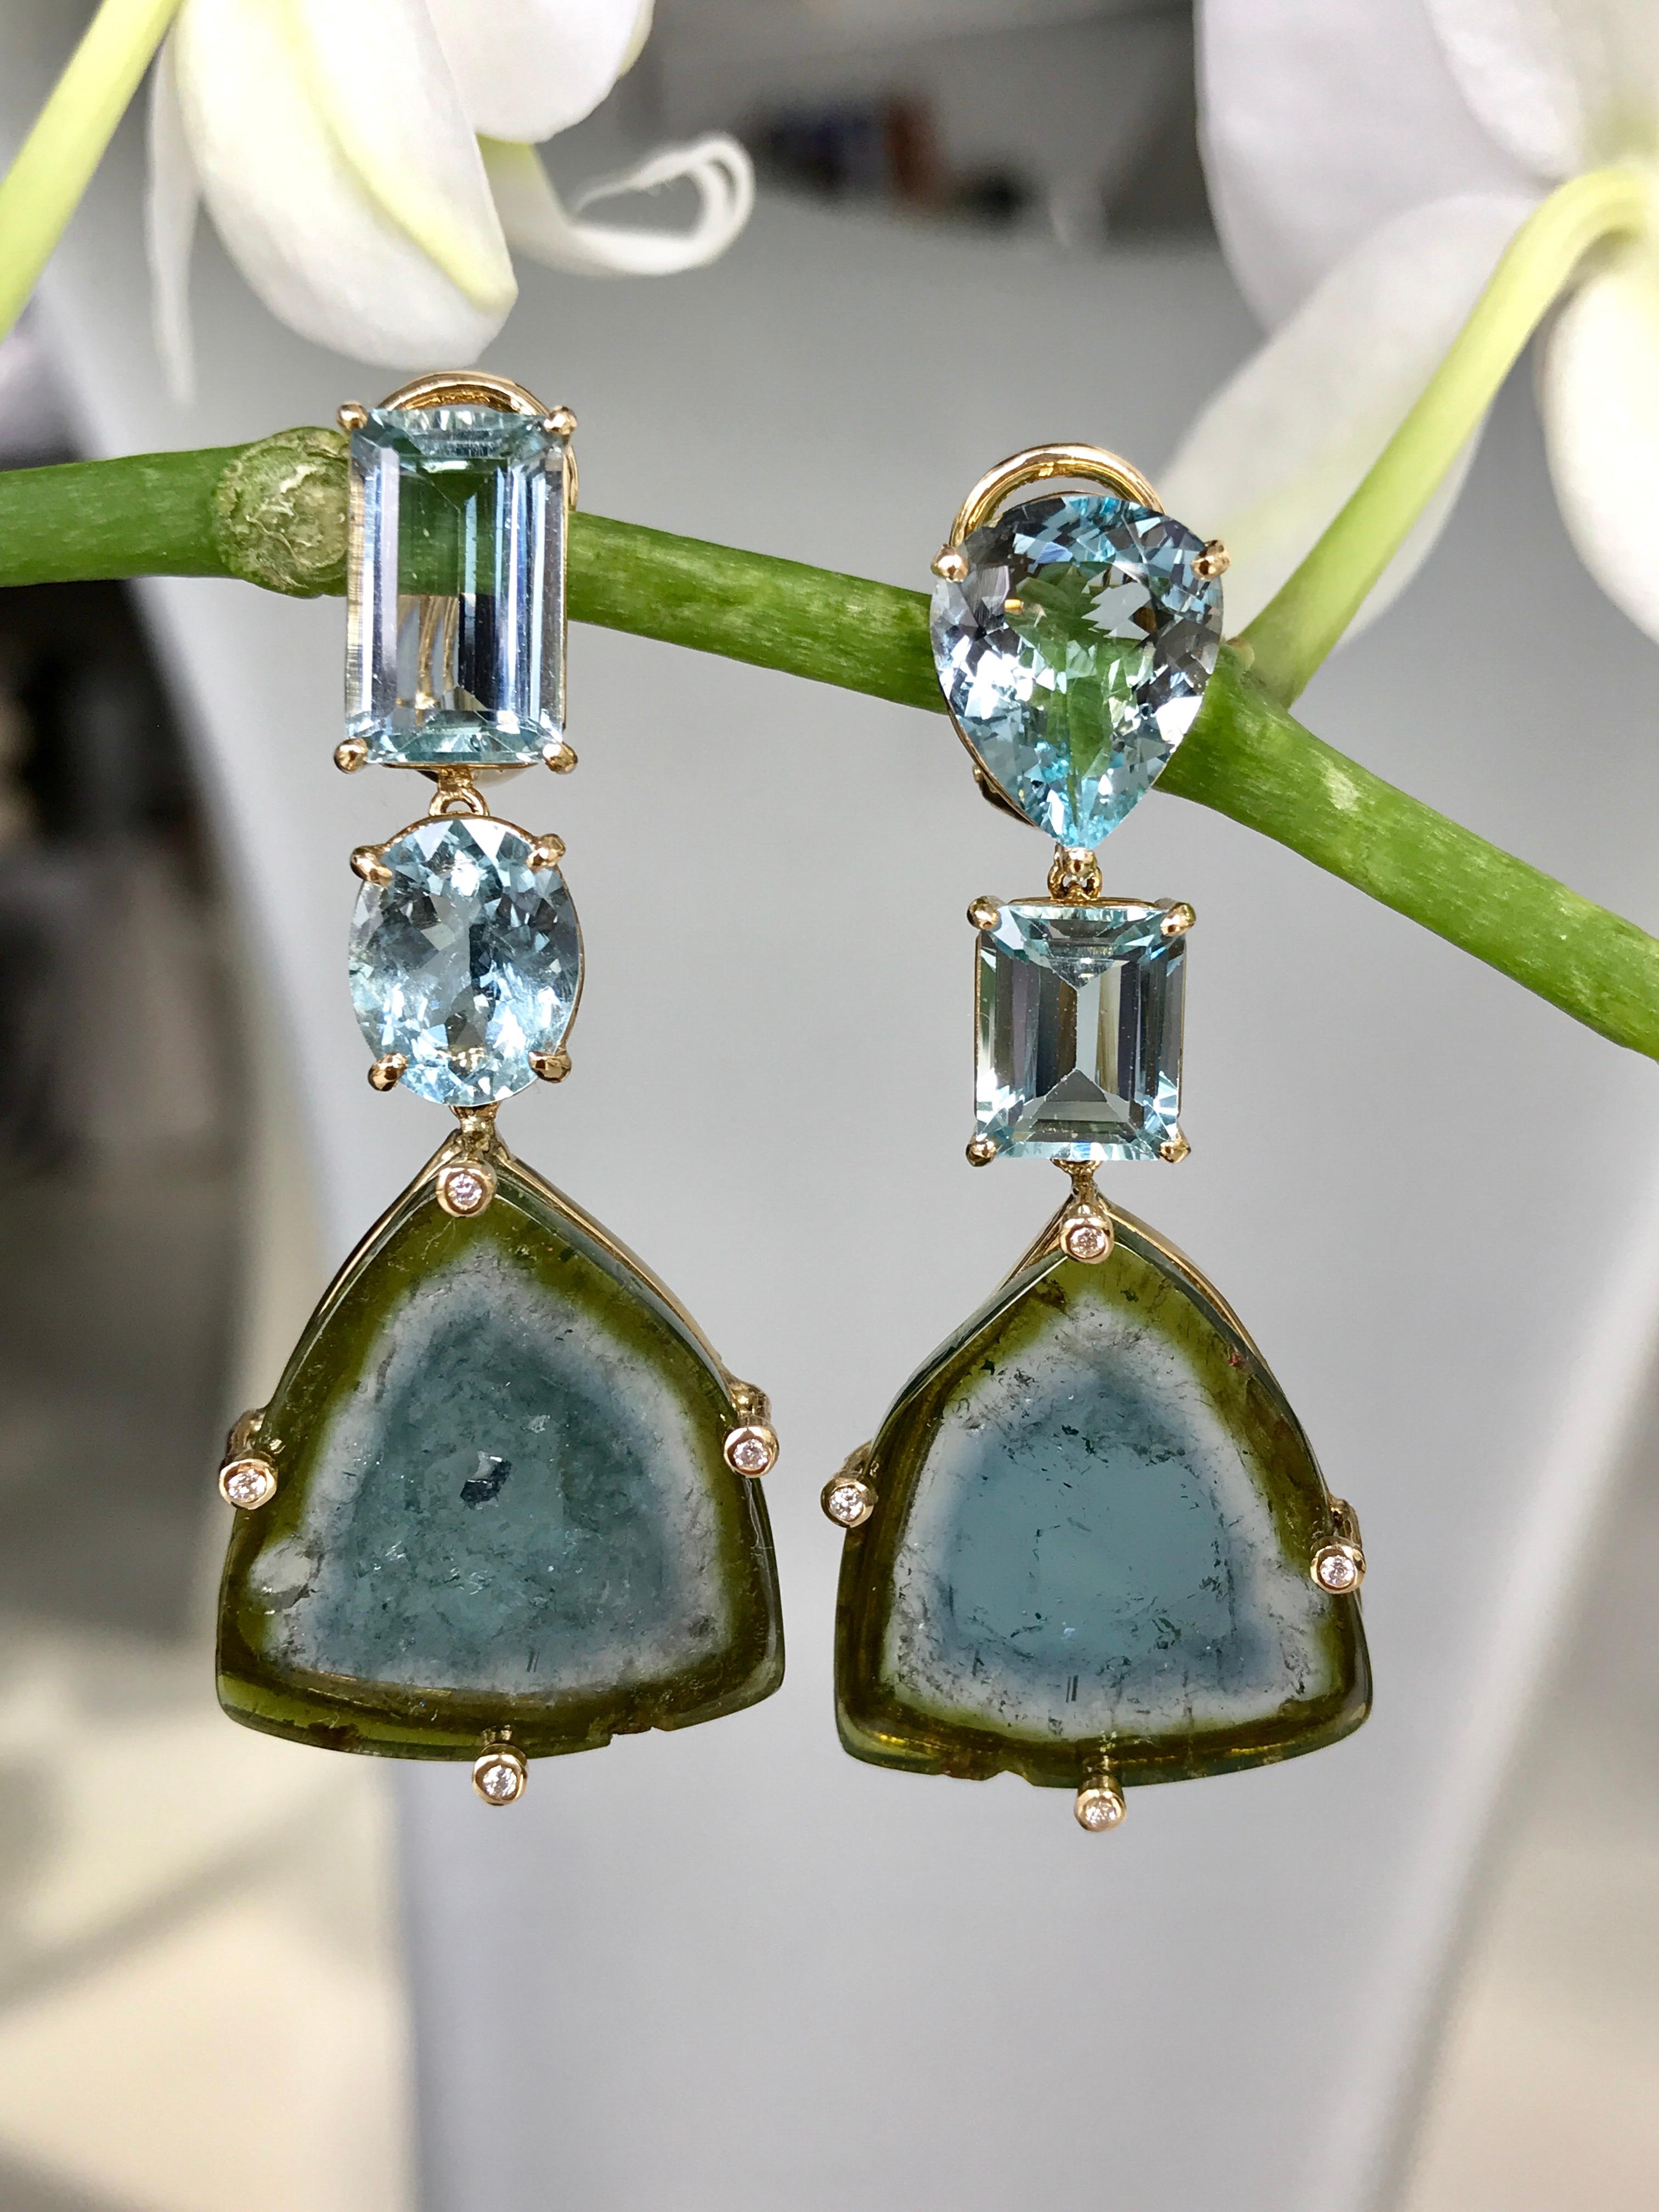 Faceted aquamarine and bicolor tourmaline slice drop dangle earrings accented with diamonds, handcrafted in 18 karat yellow gold. 1.92 inches or 49 mm length.

These one-of-a-kind earrings feature unusual and rare bicolor blue and green 